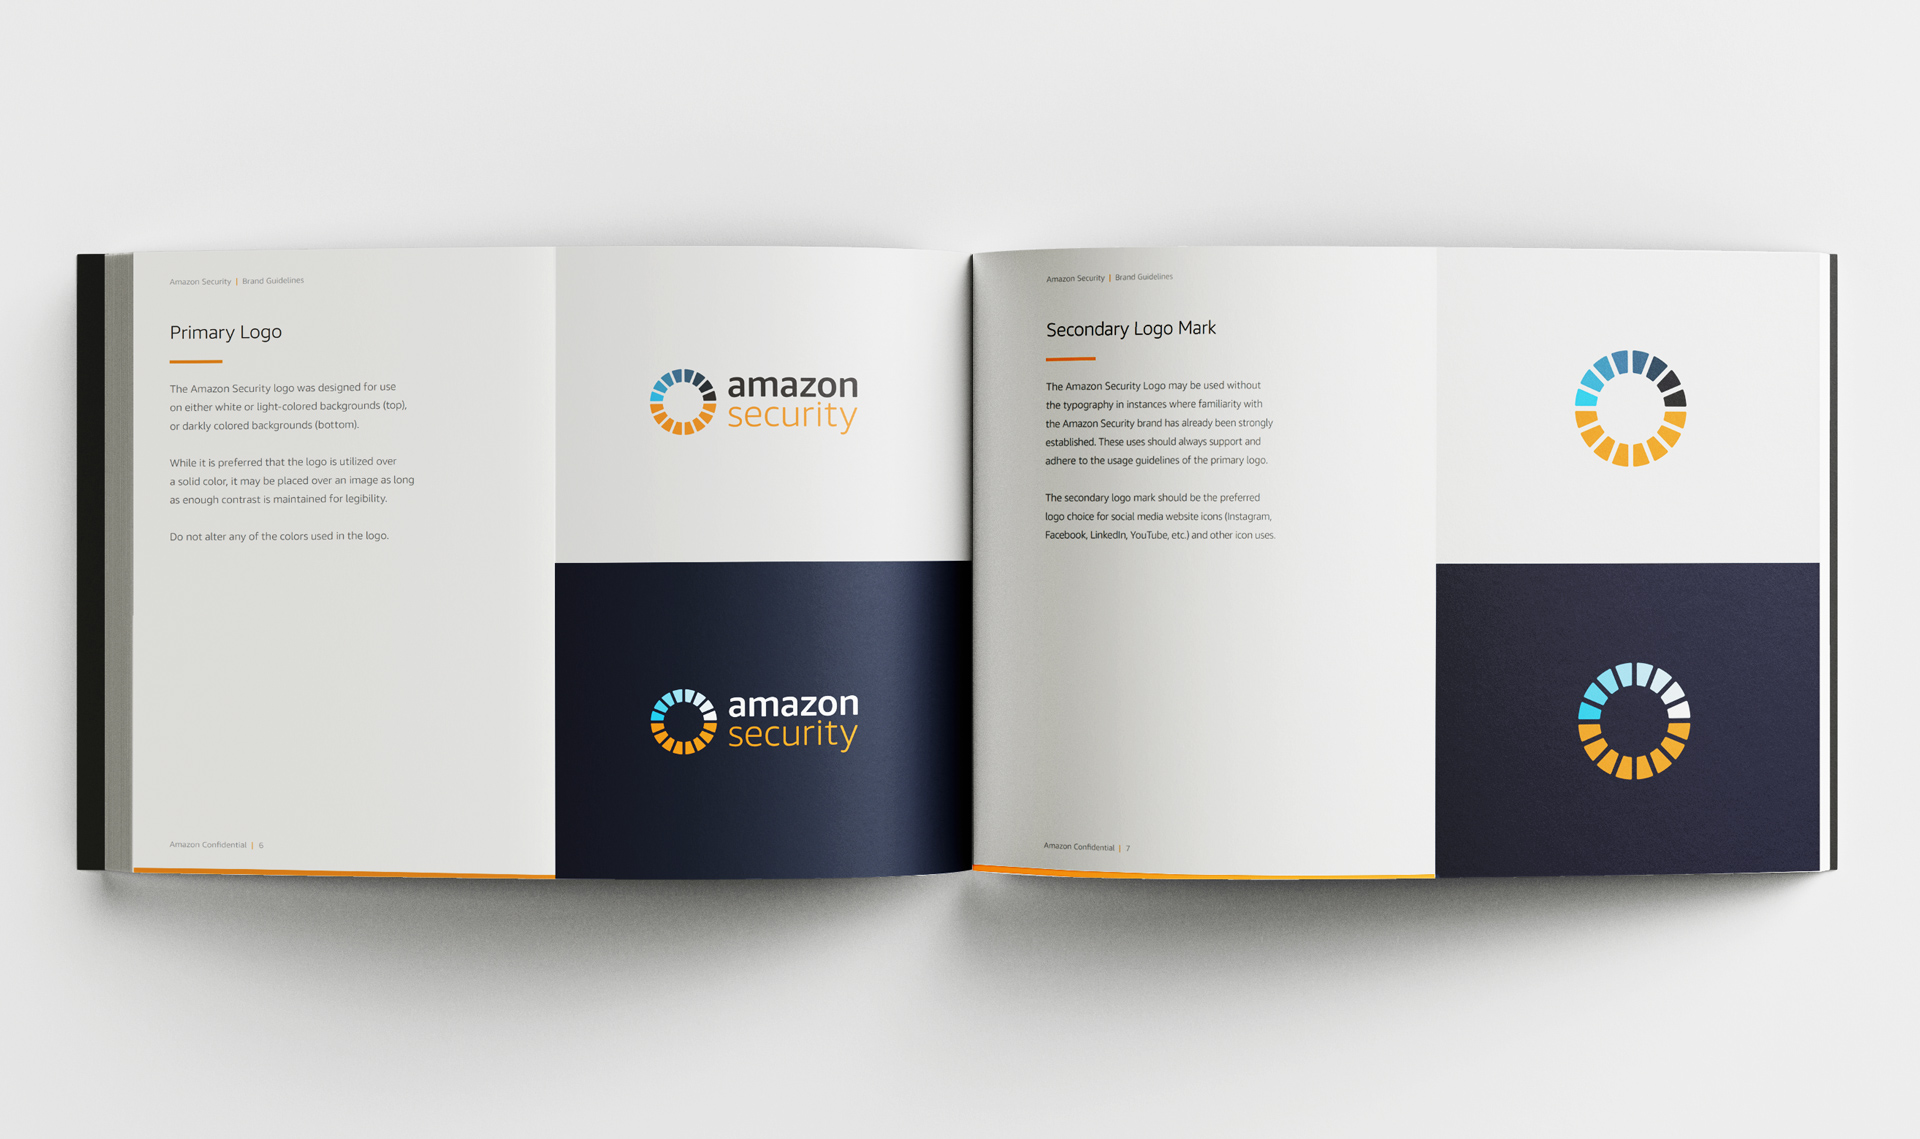 Amazon Security brand book showing logo uses created by Incubate Design for Amazon